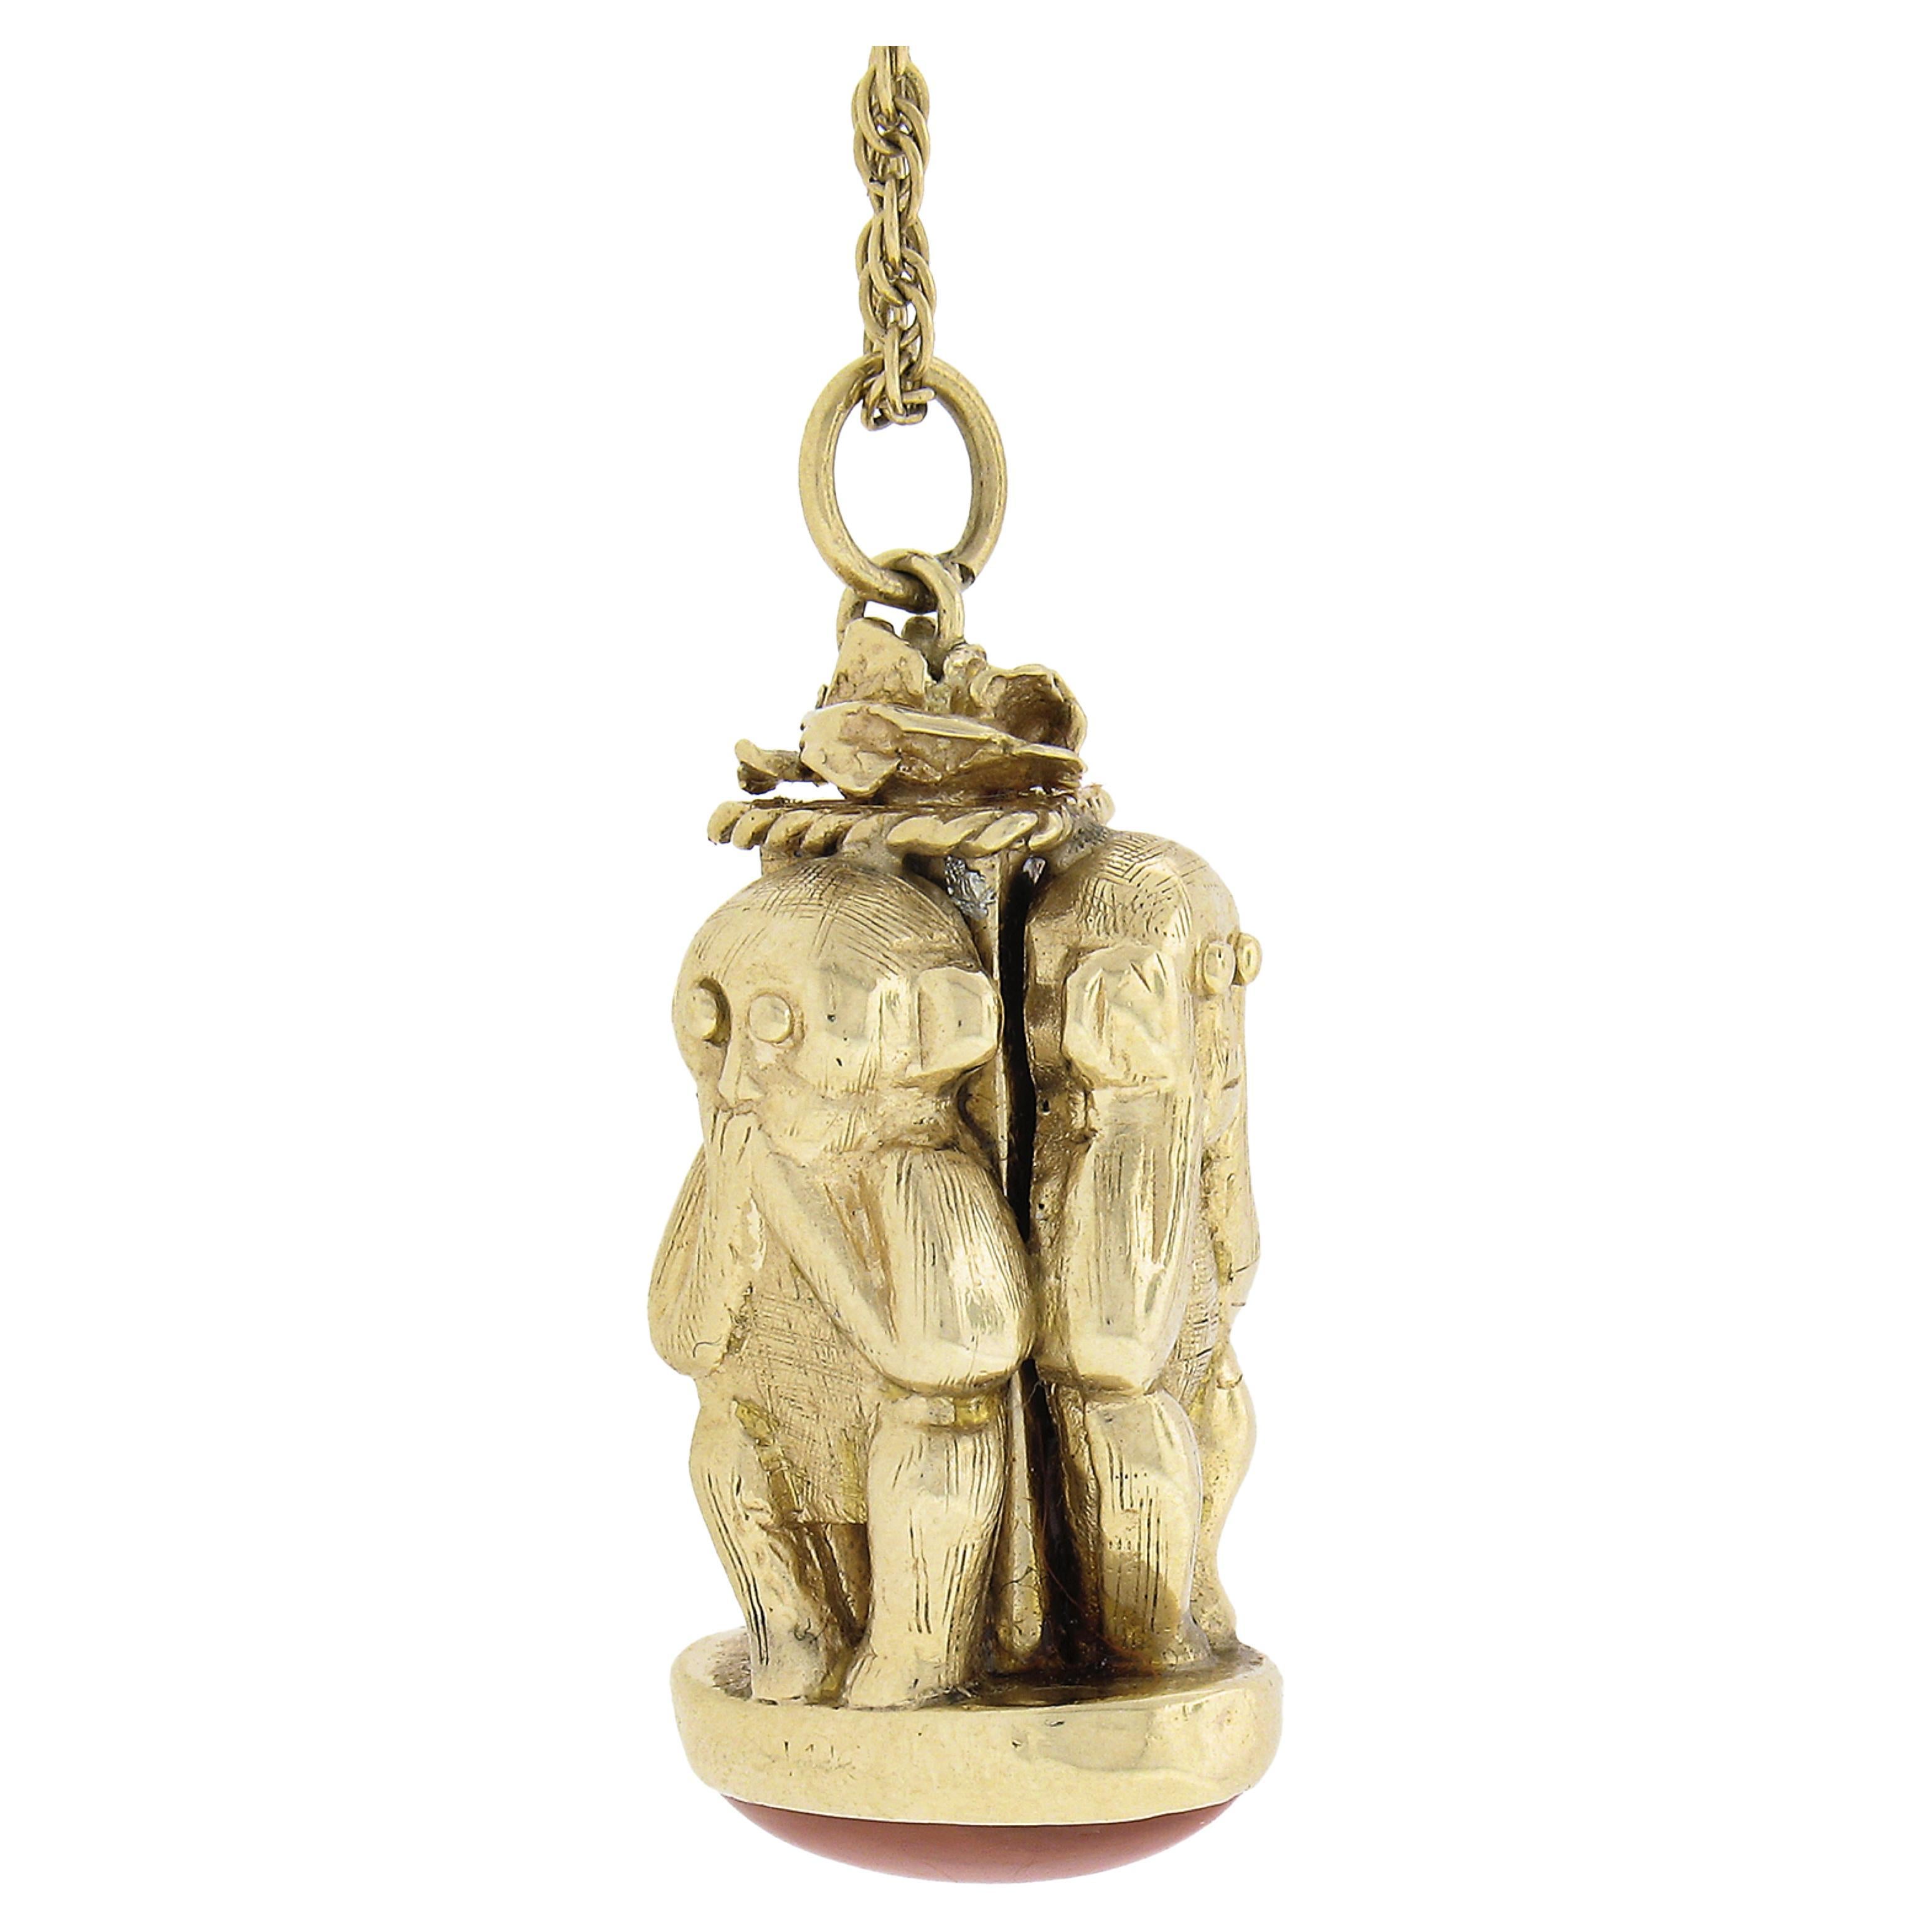 Here we have a beautiful perfume flask charm/pendant that is crafted in solid 14k yellow gold and features a 3D see. speak, hear no evil monkey design. The bottom of the pendant is adorned with oval cabochon cut natural coral with a beautiful rich